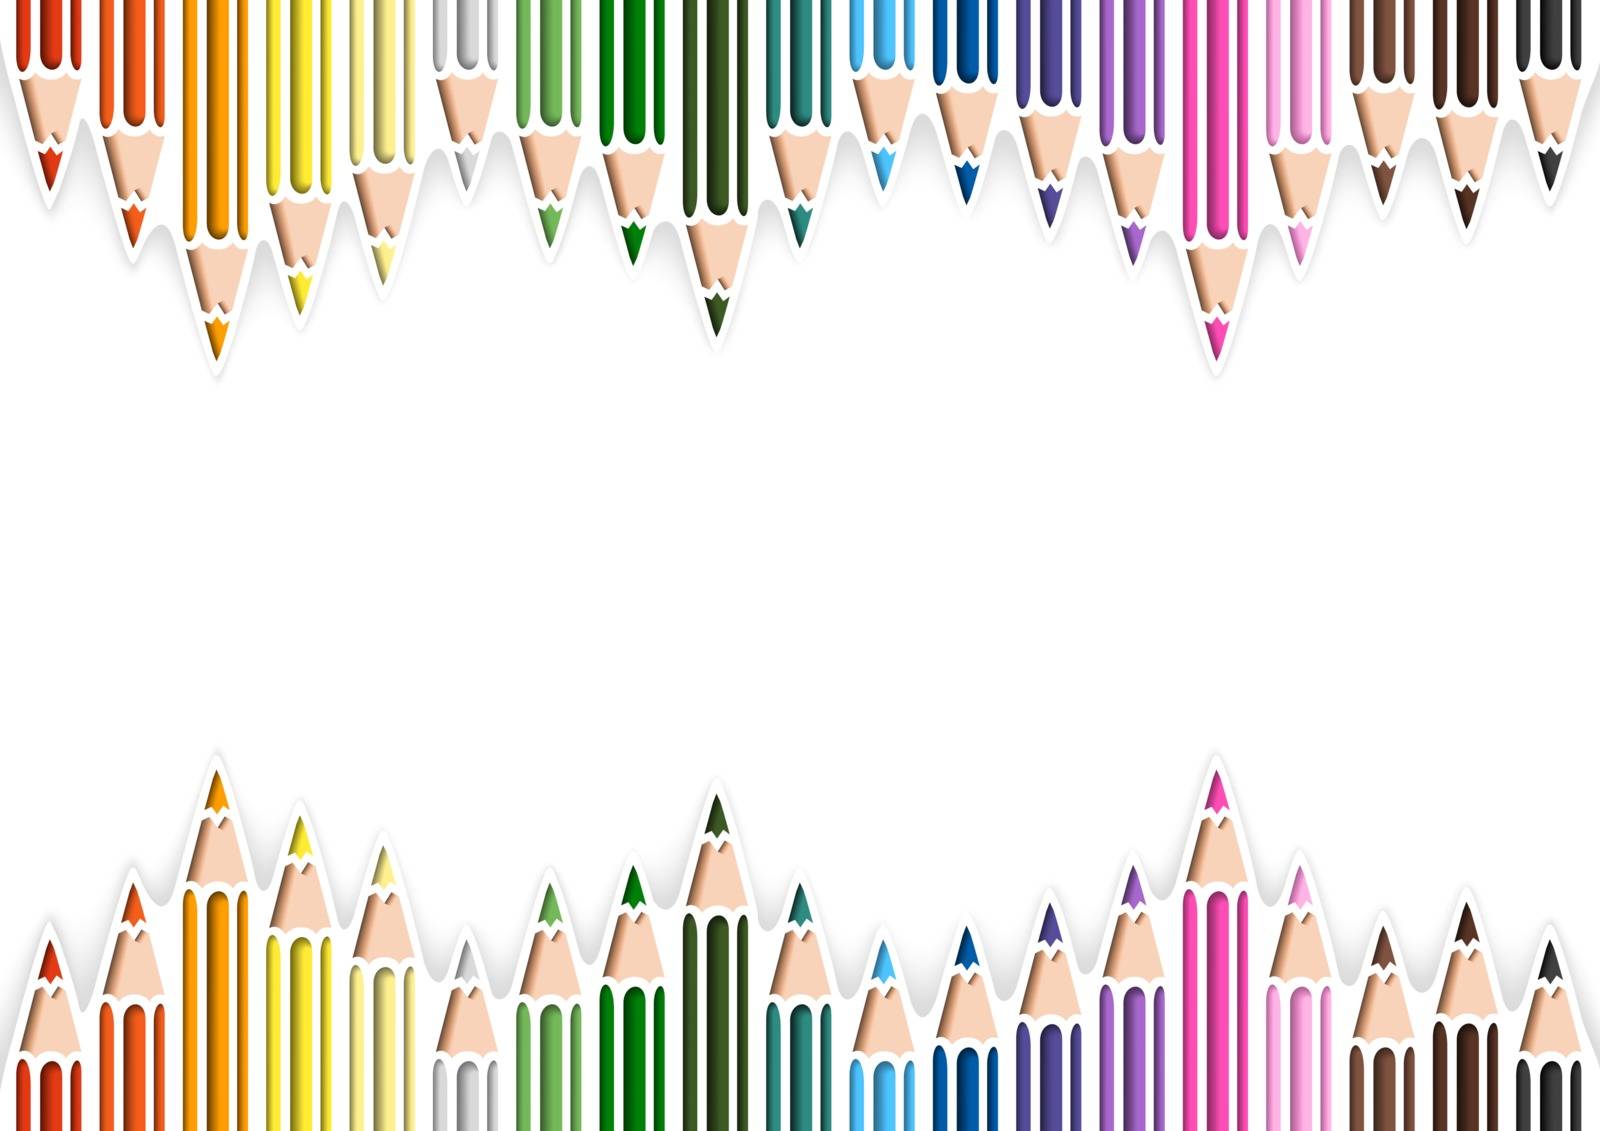 Colorful Pencils in Cutout Style on White Background with Three-dimensional Shadows - Abstract Colored Illustration, Vector